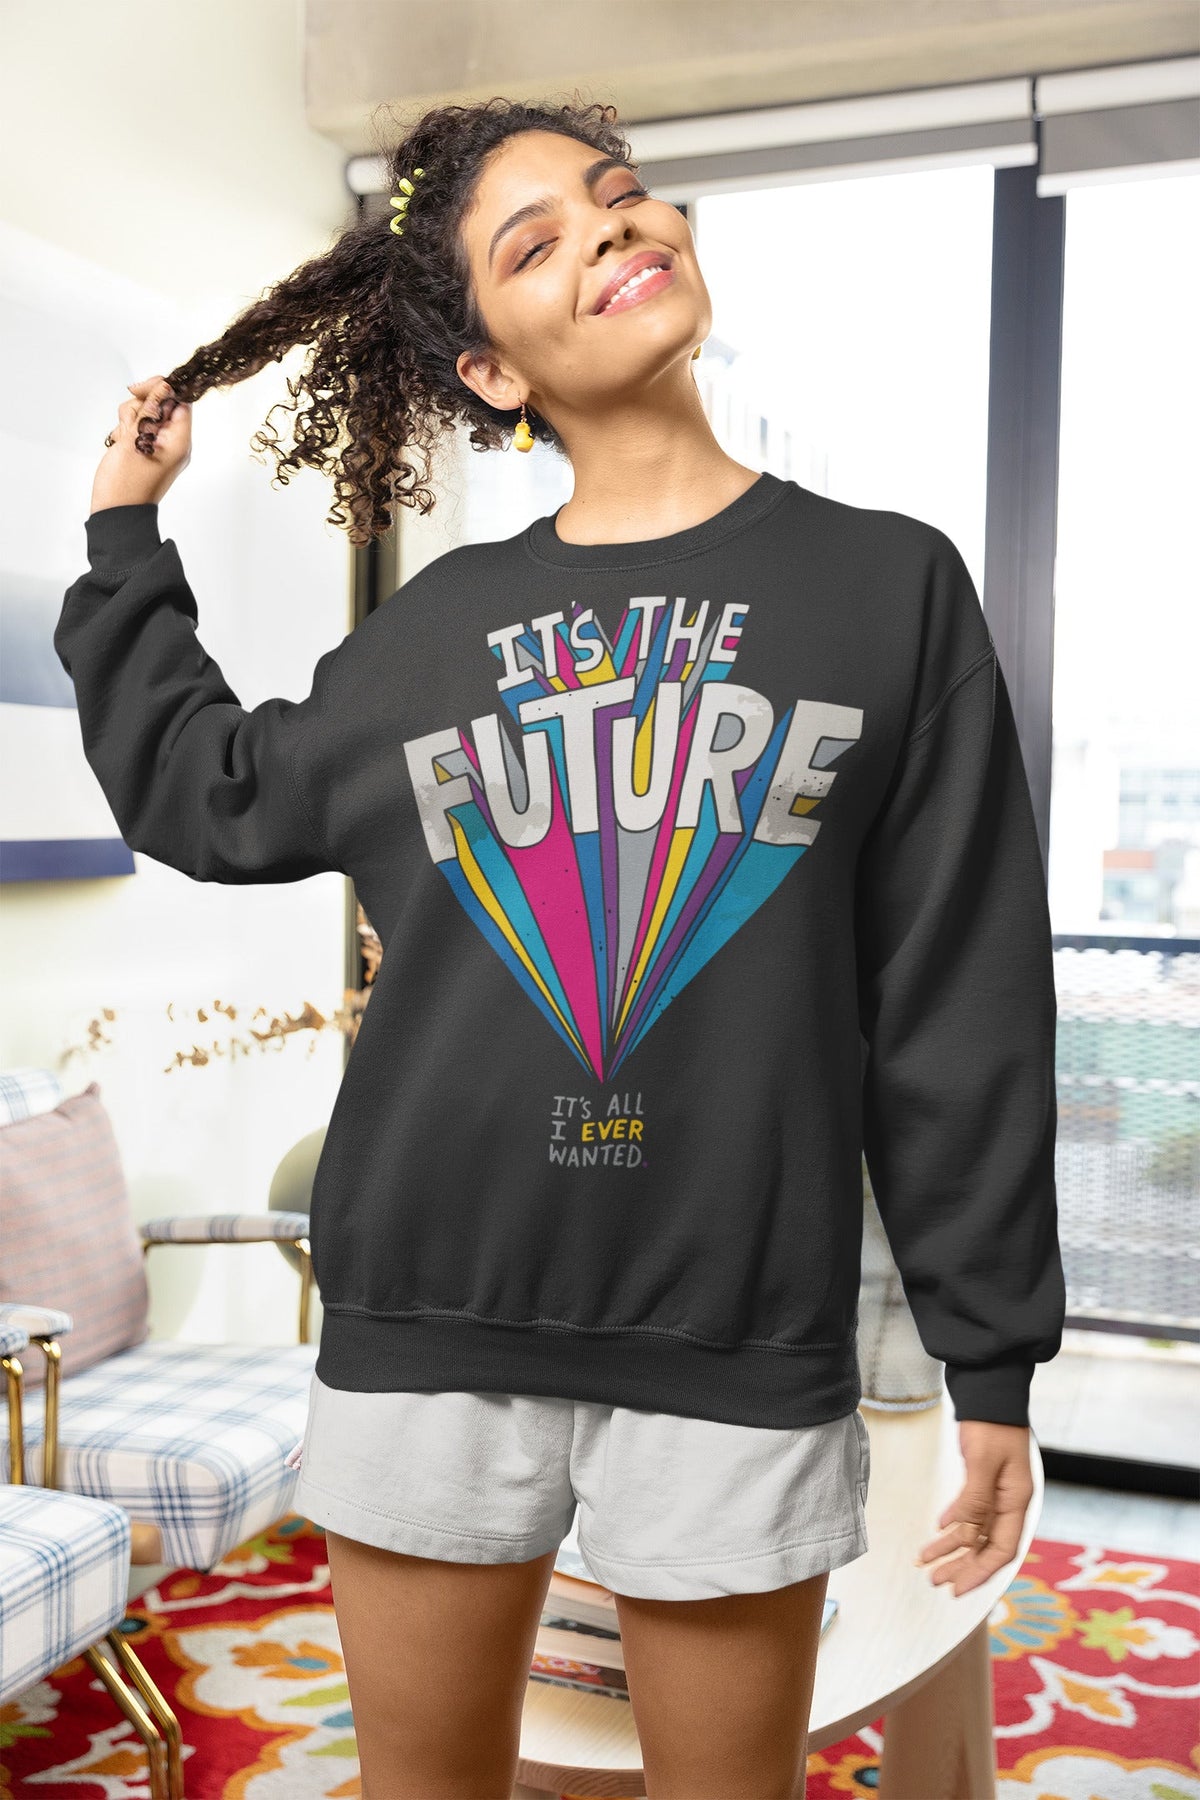 Future relaxed Fit Sweatshirt For Women